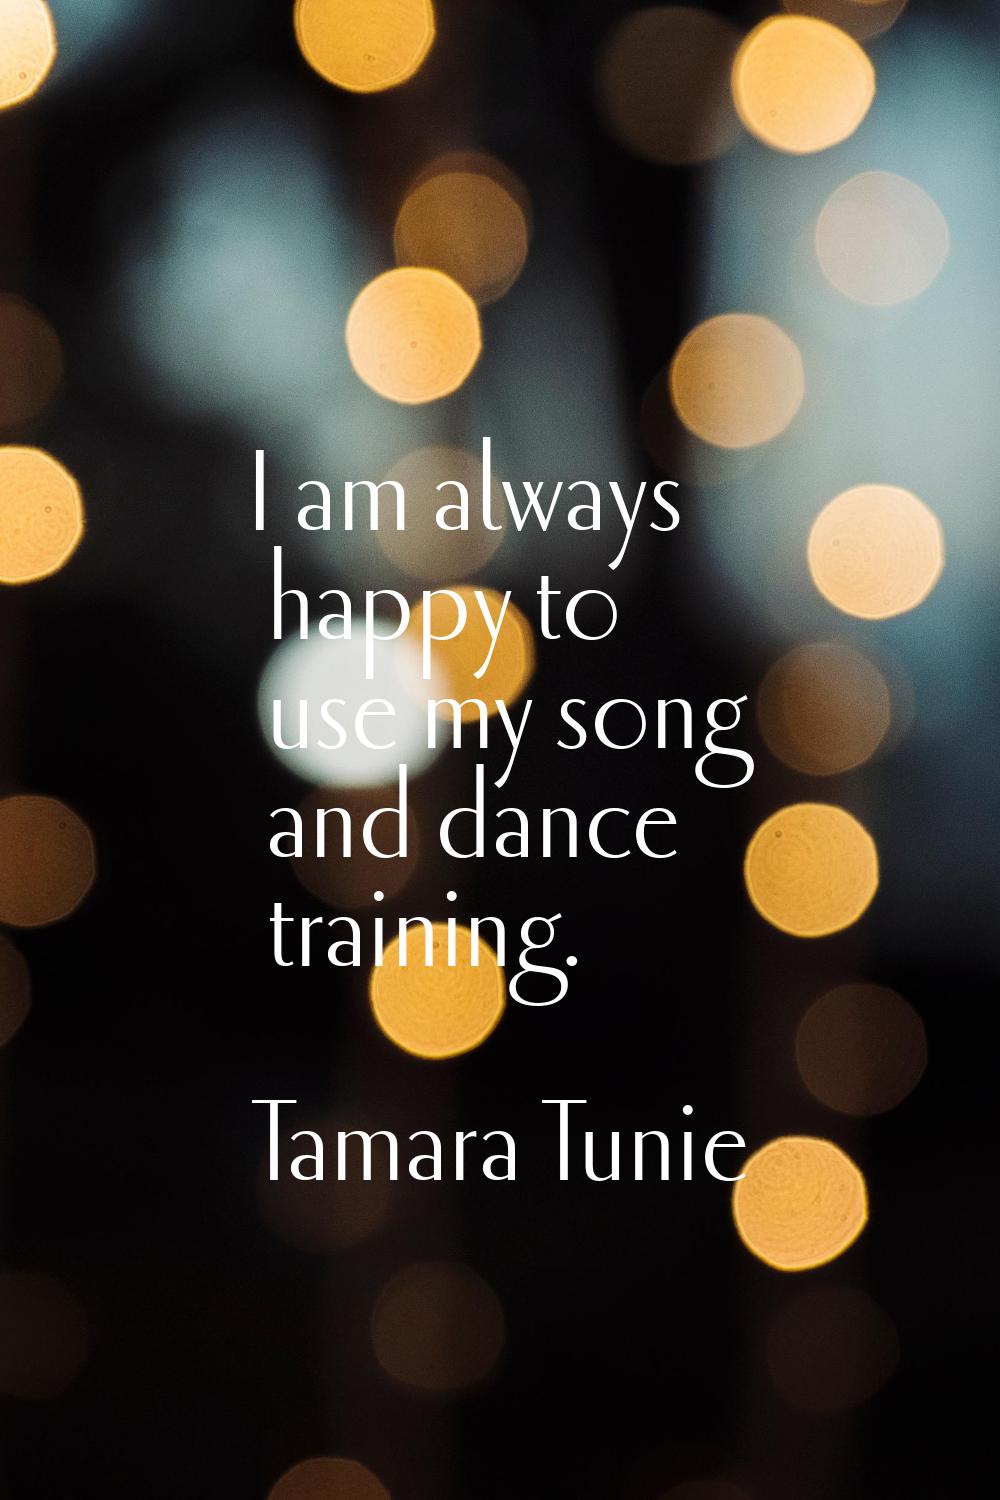 I am always happy to use my song and dance training.